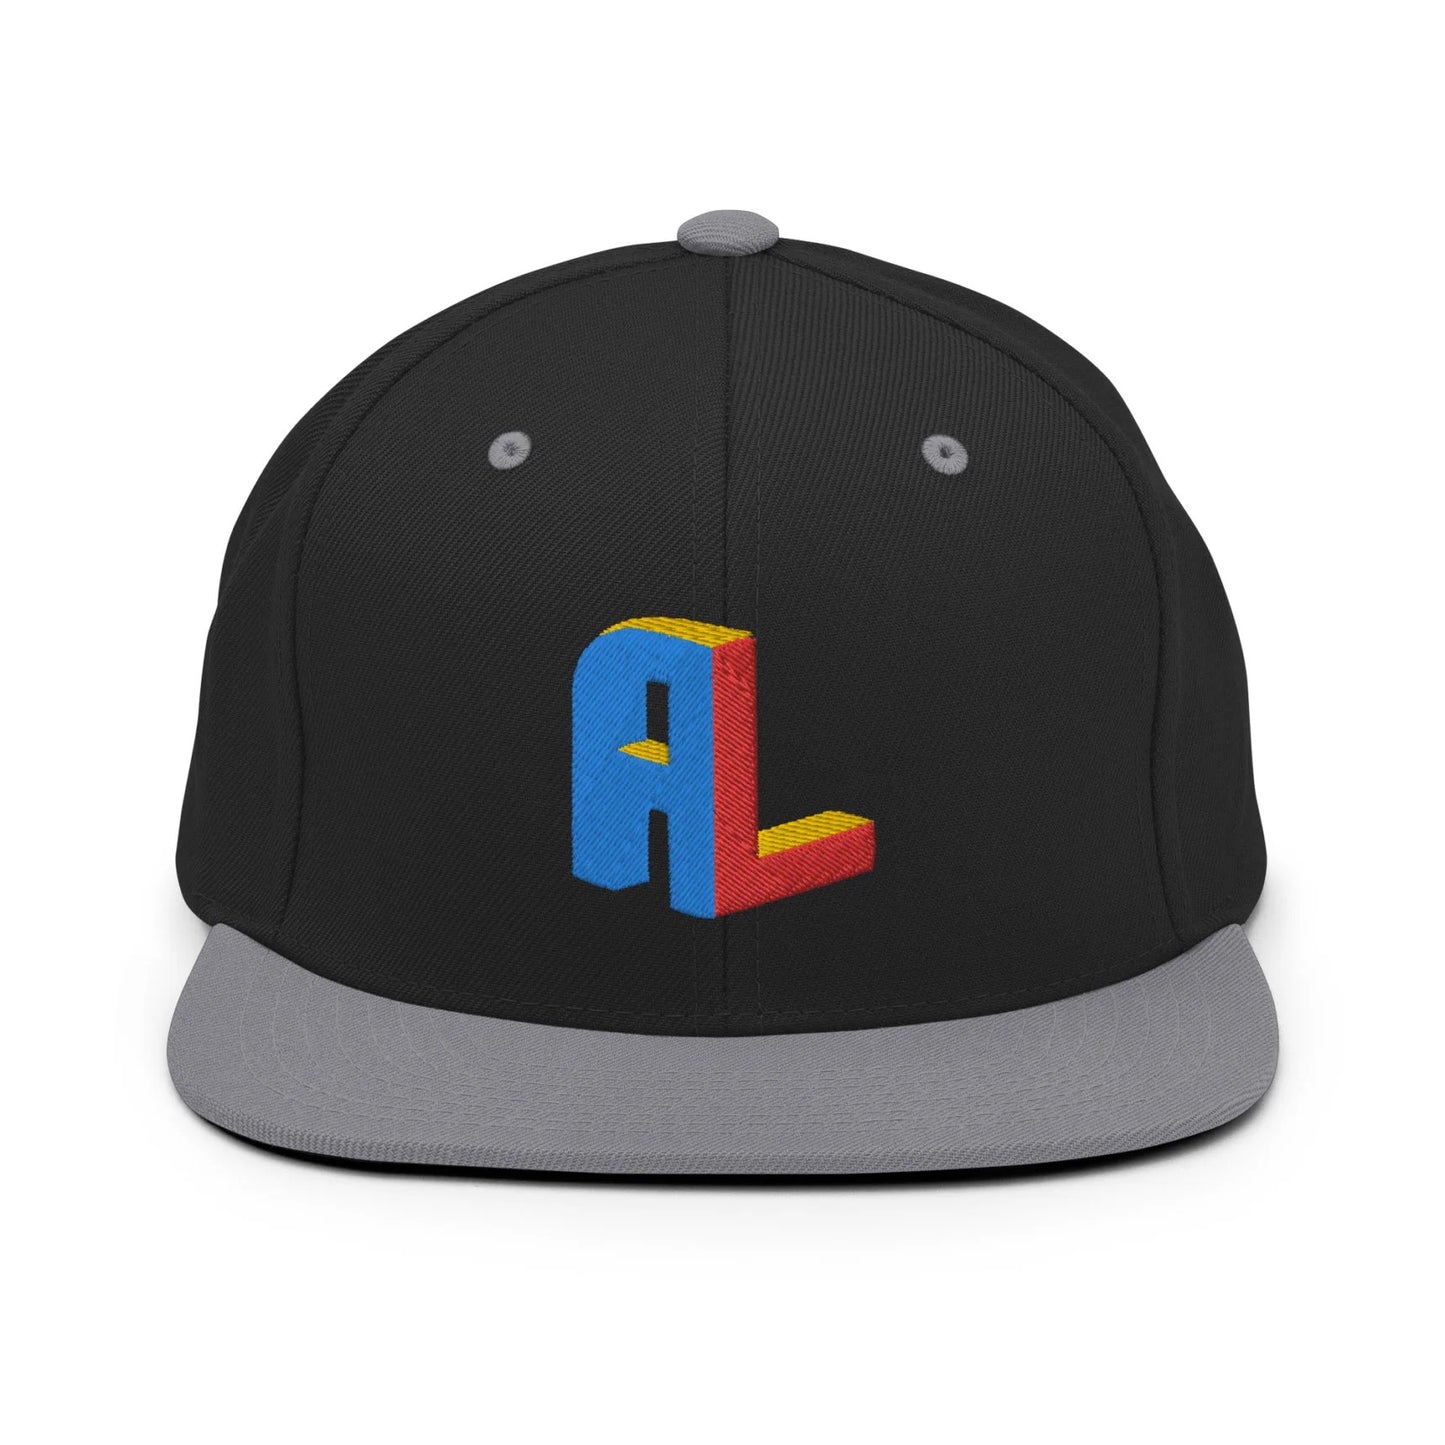 Ance Larmstrong ShowZone snapback hat in black with grey brim and accents